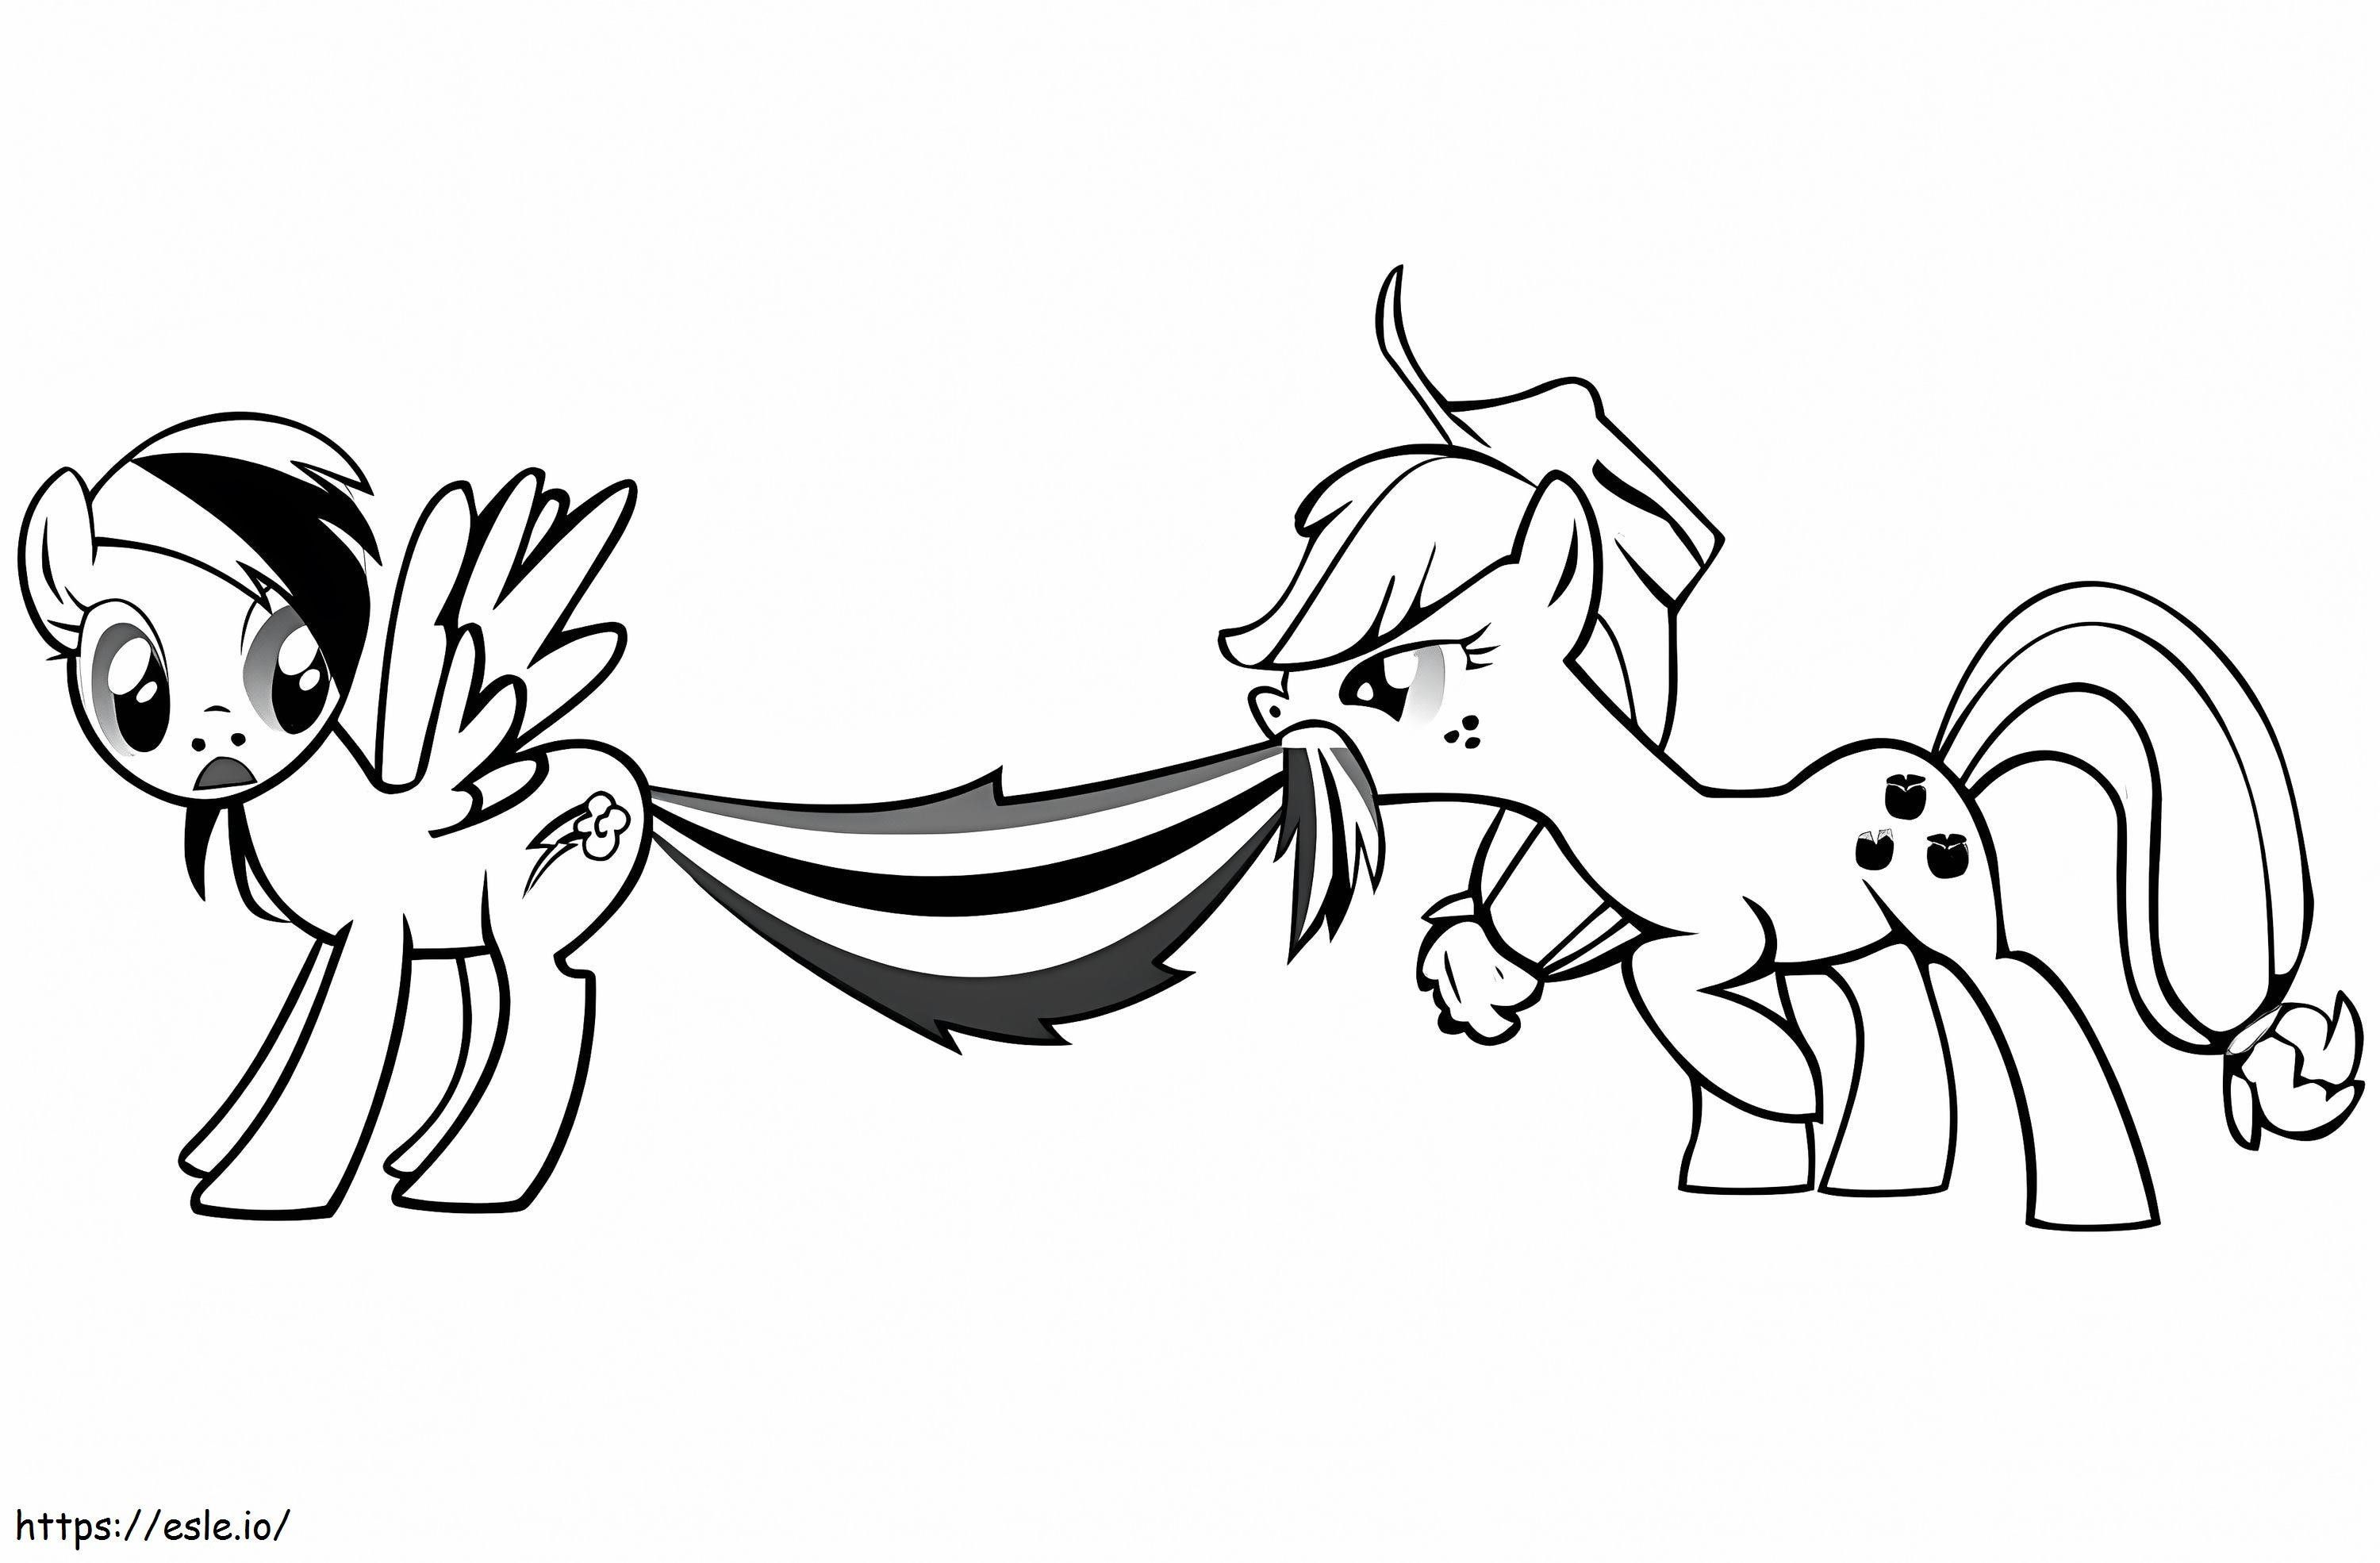 Rainbow Dash And Applejack coloring page